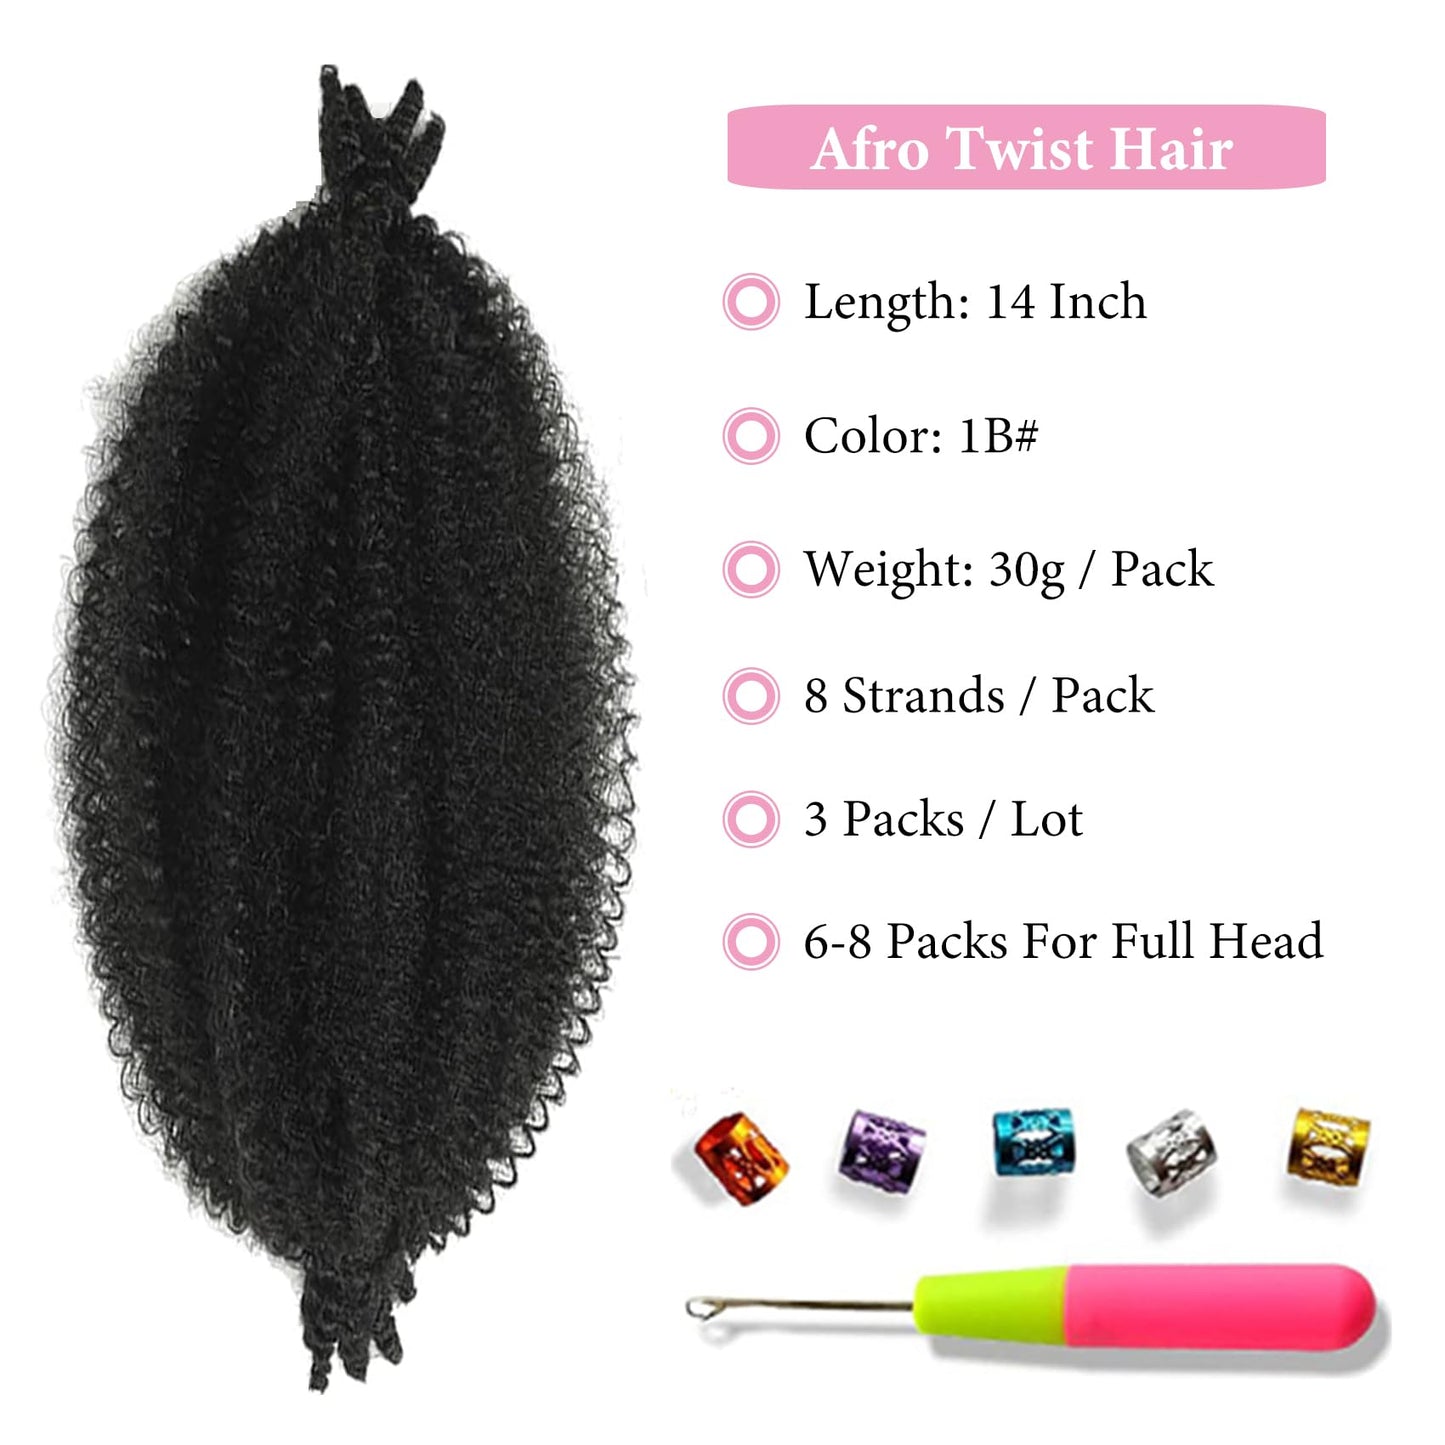 14 Inch Marley Twist Braiding Hair Afro Twist Hair Natural Black 3 Packs Springy Afro Twist Hair for Faux Locs Spring Twist Hair Kinky Braiding Hair Extensions for Women (14inch 1B Pack of 3)